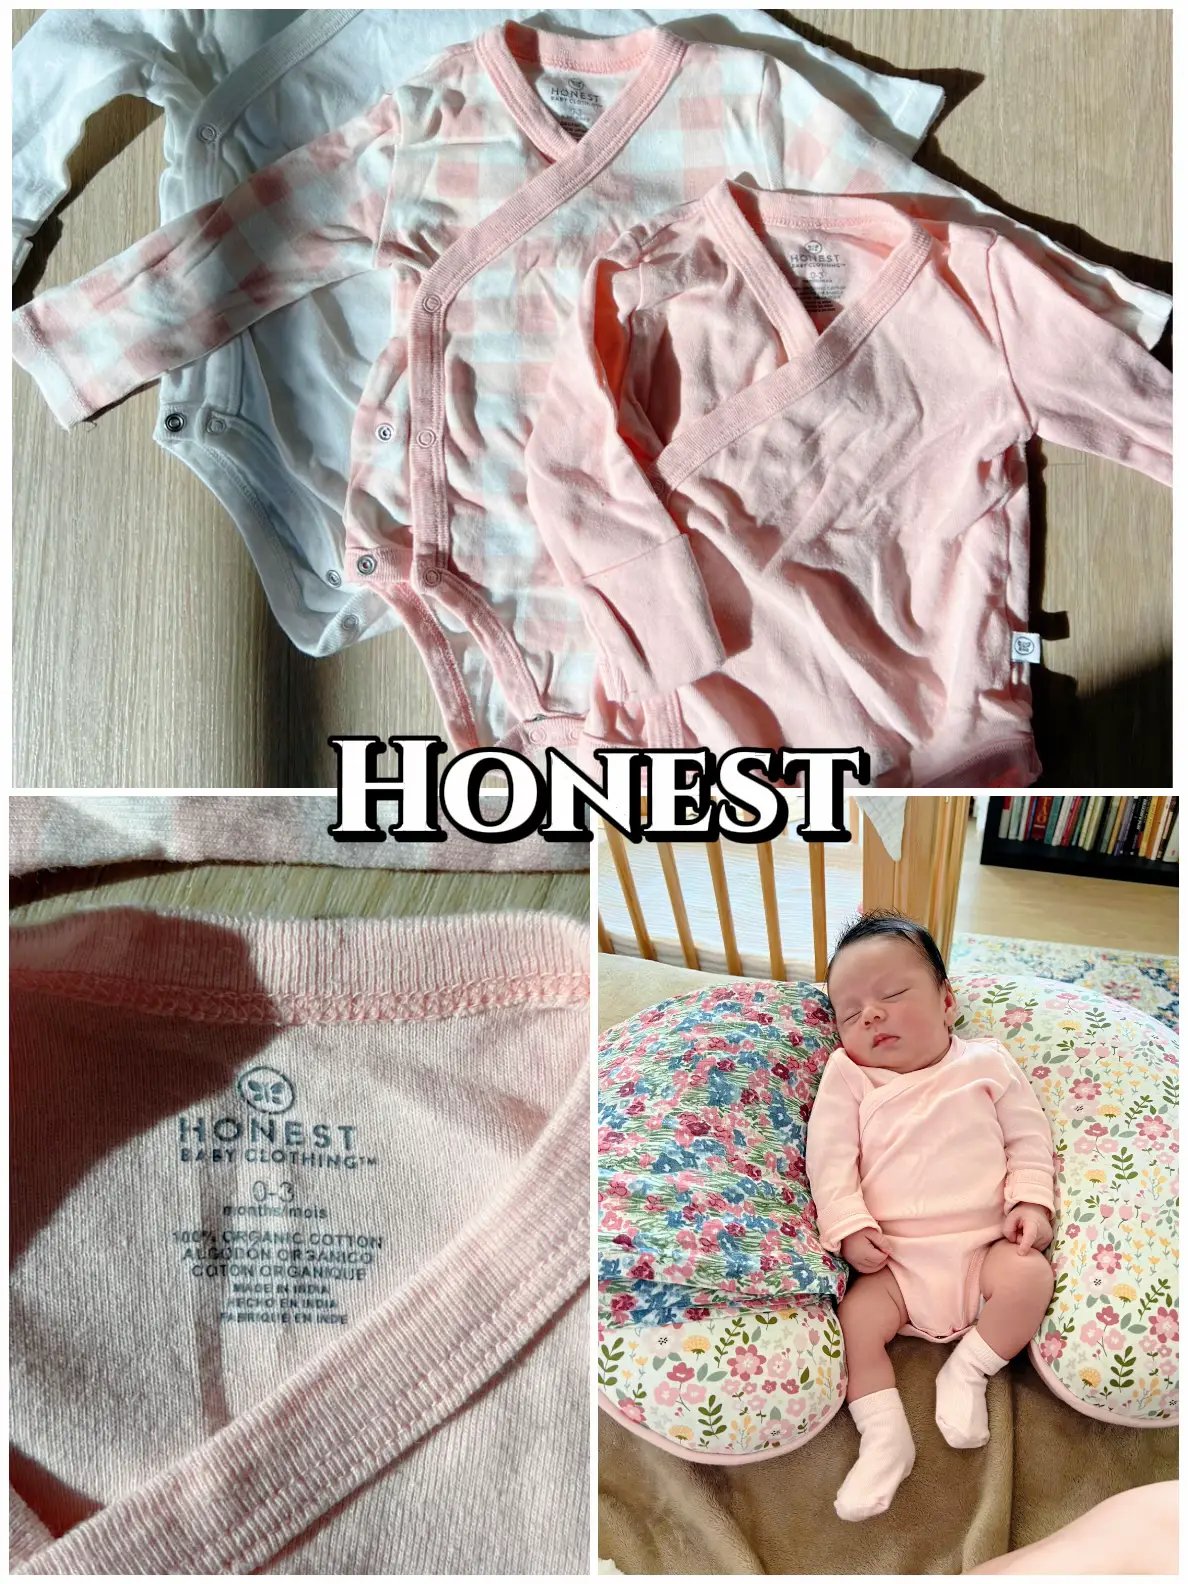 quality baby clothes - Lemon8 Search